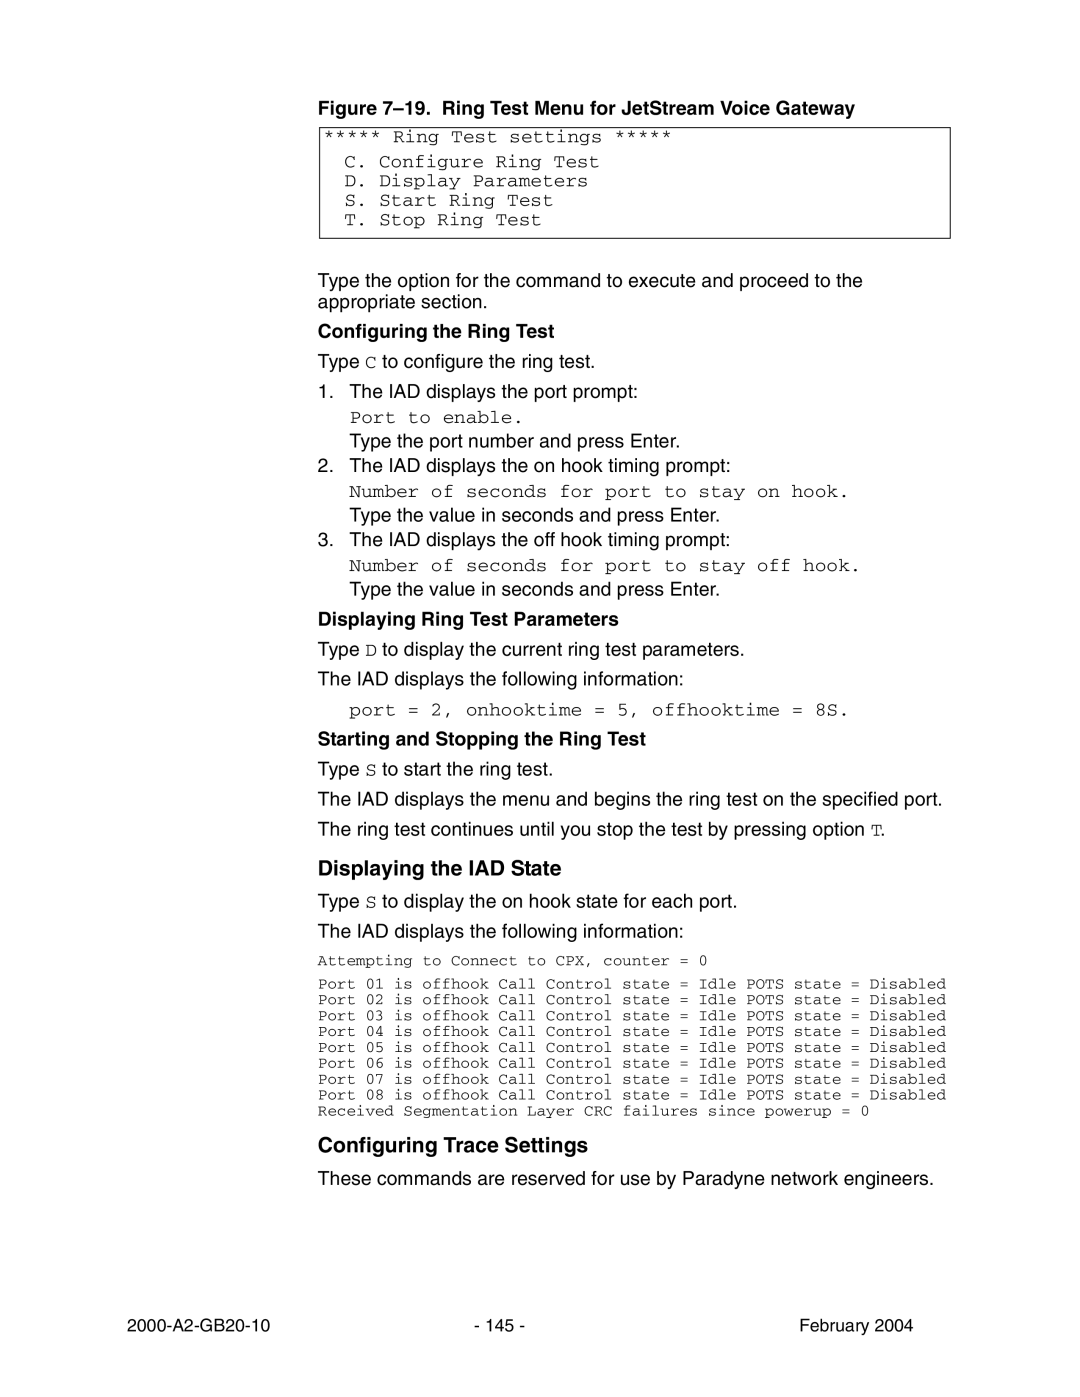 Paradyne JetFusion Integrated Access Device manual Displaying the IAD State, Configuring Trace Settings 